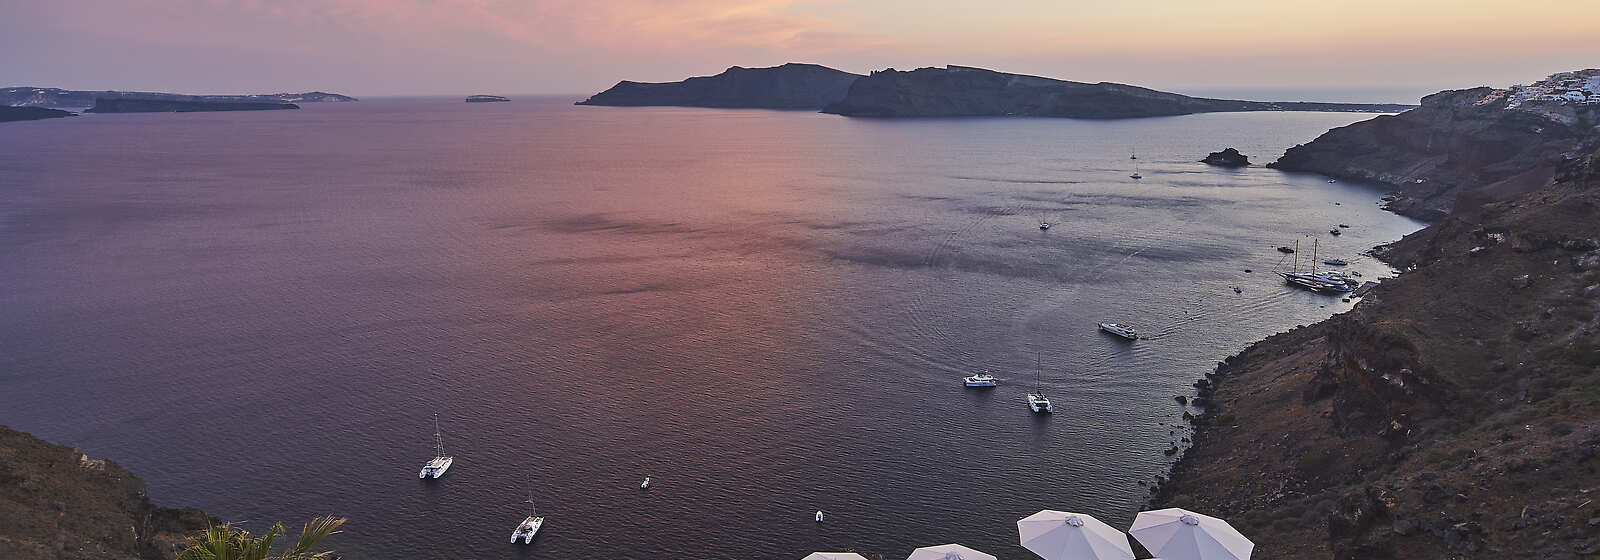 Katikies Kirini hotel in Santorini, Oia promises to bedazzle your senses with its exquisite setting and miraculous views to the Caldera.